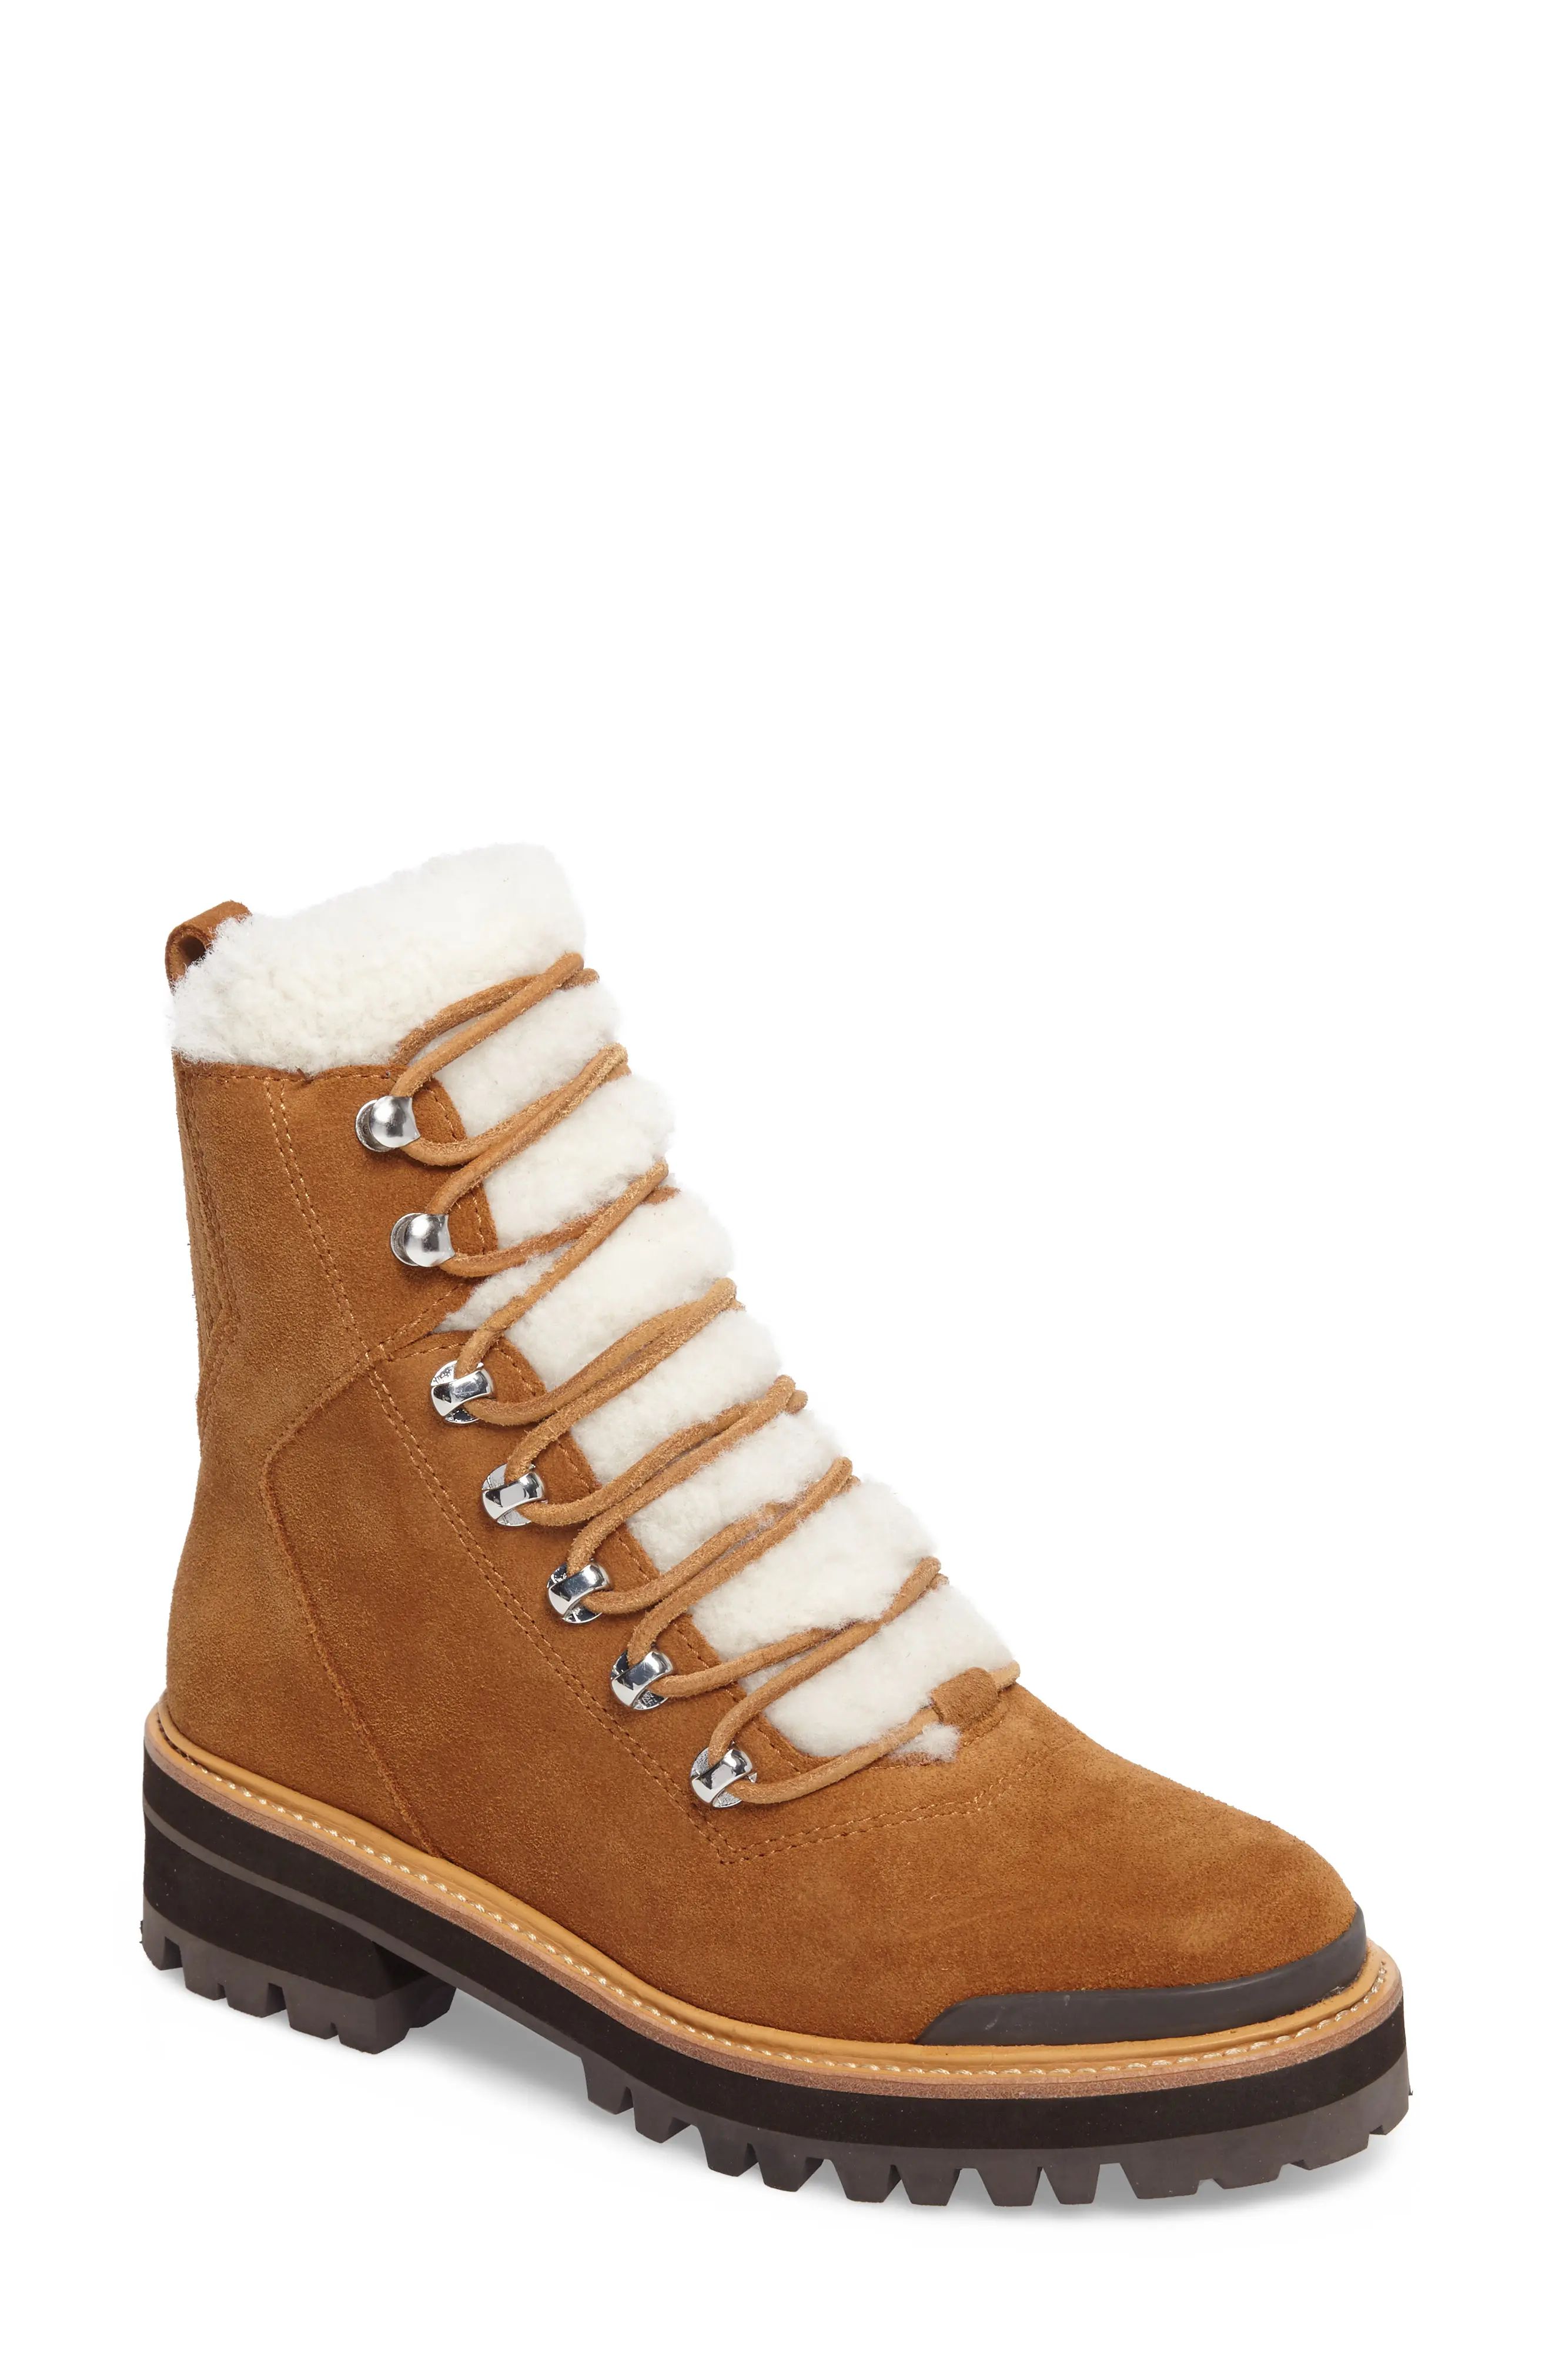 Women's Marc Fisher Ltd Izzie Genuine Shearling Lace-Up Boot, Size 5 M - Brown | Nordstrom